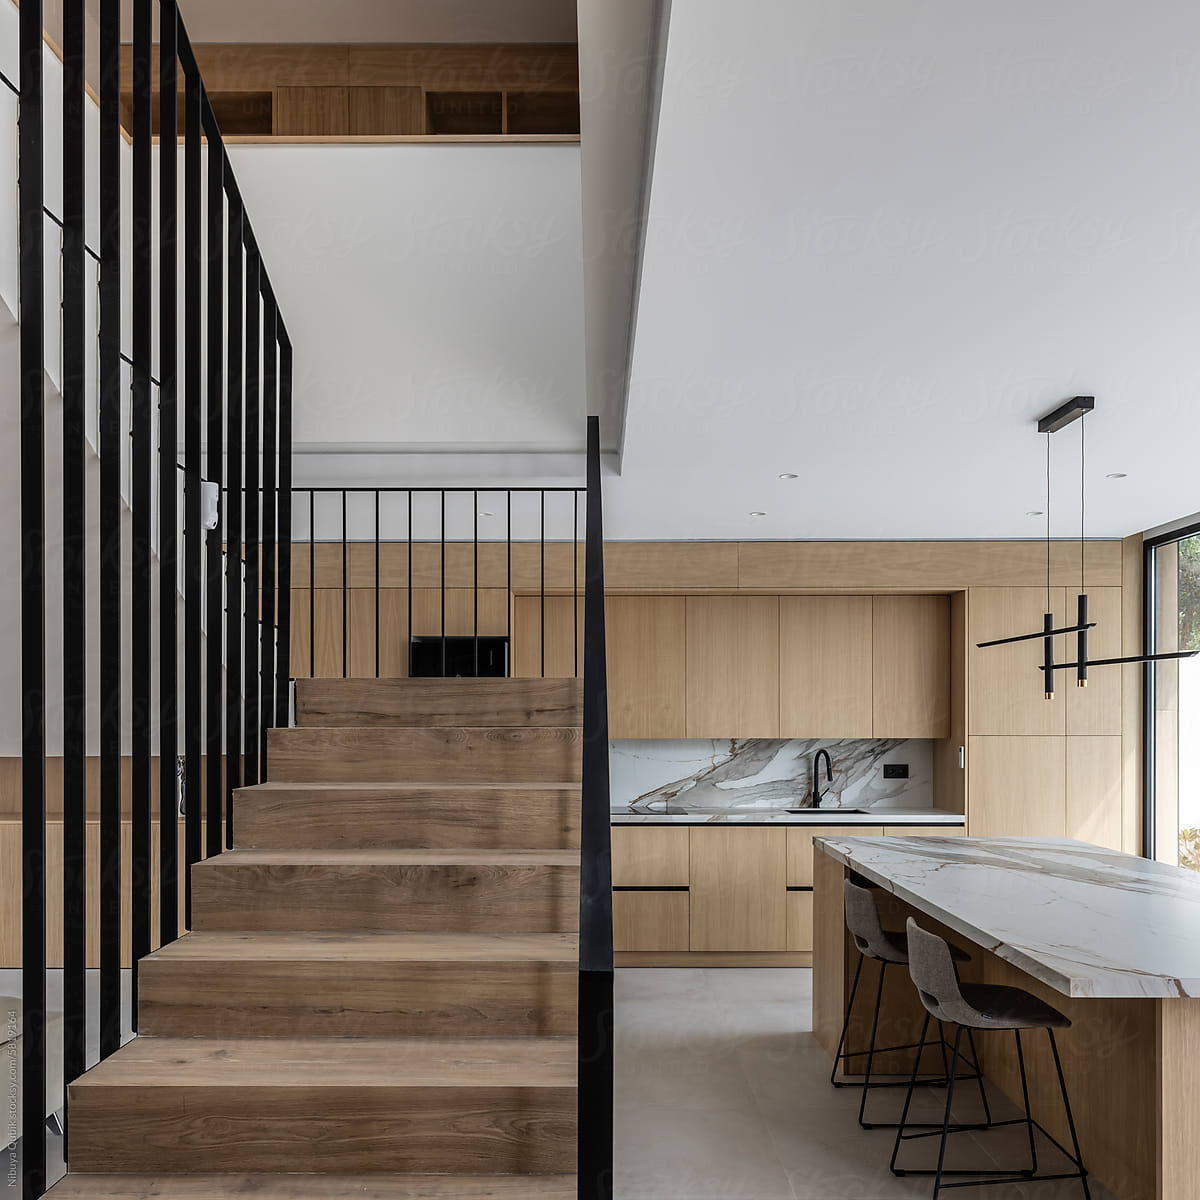 Minimalist kitchen with stairs leading to the upper floor of the home